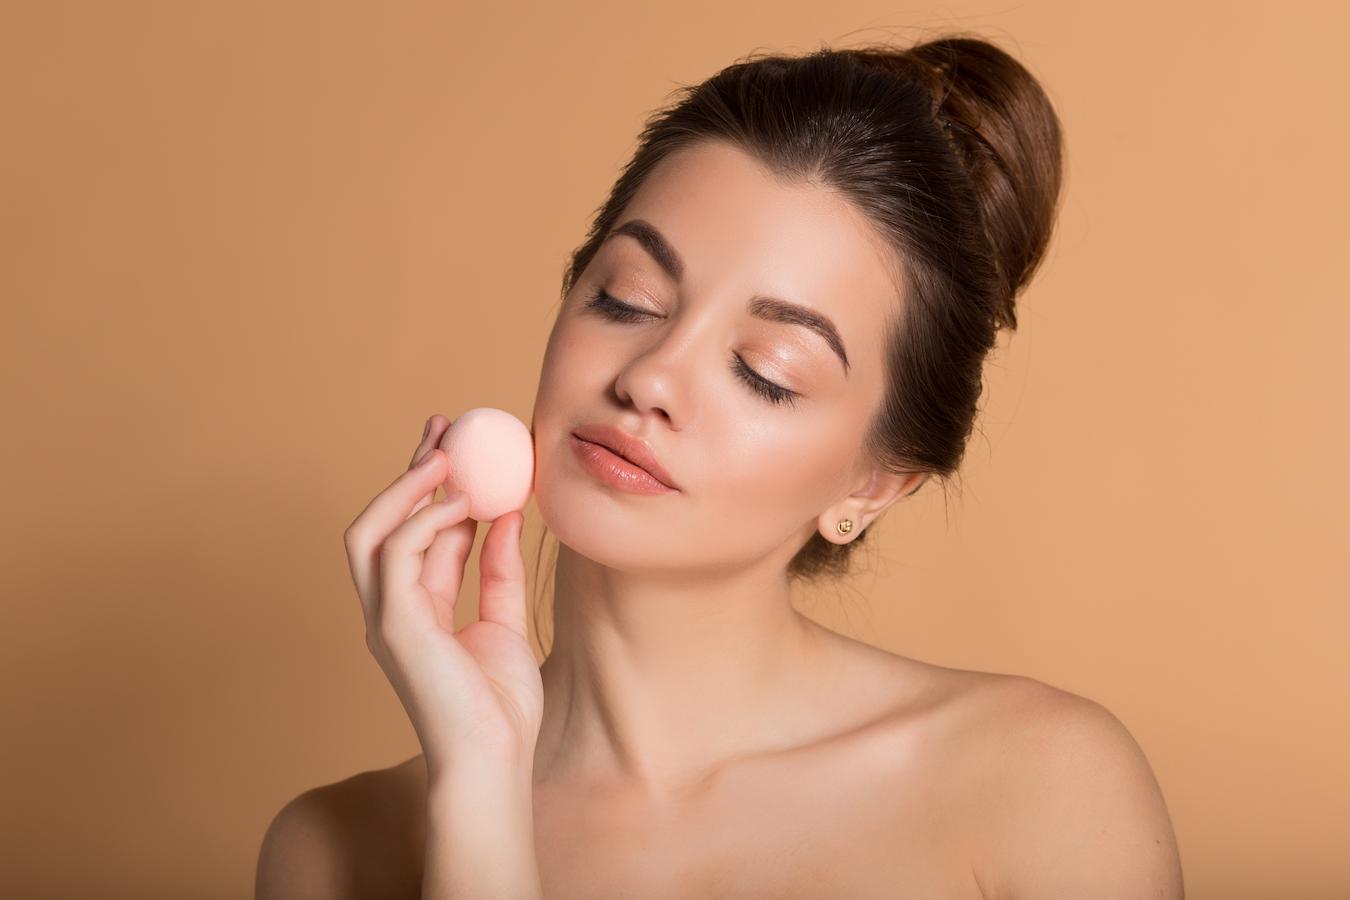 Mineral makeup and foundation can be beneficial for any skin type